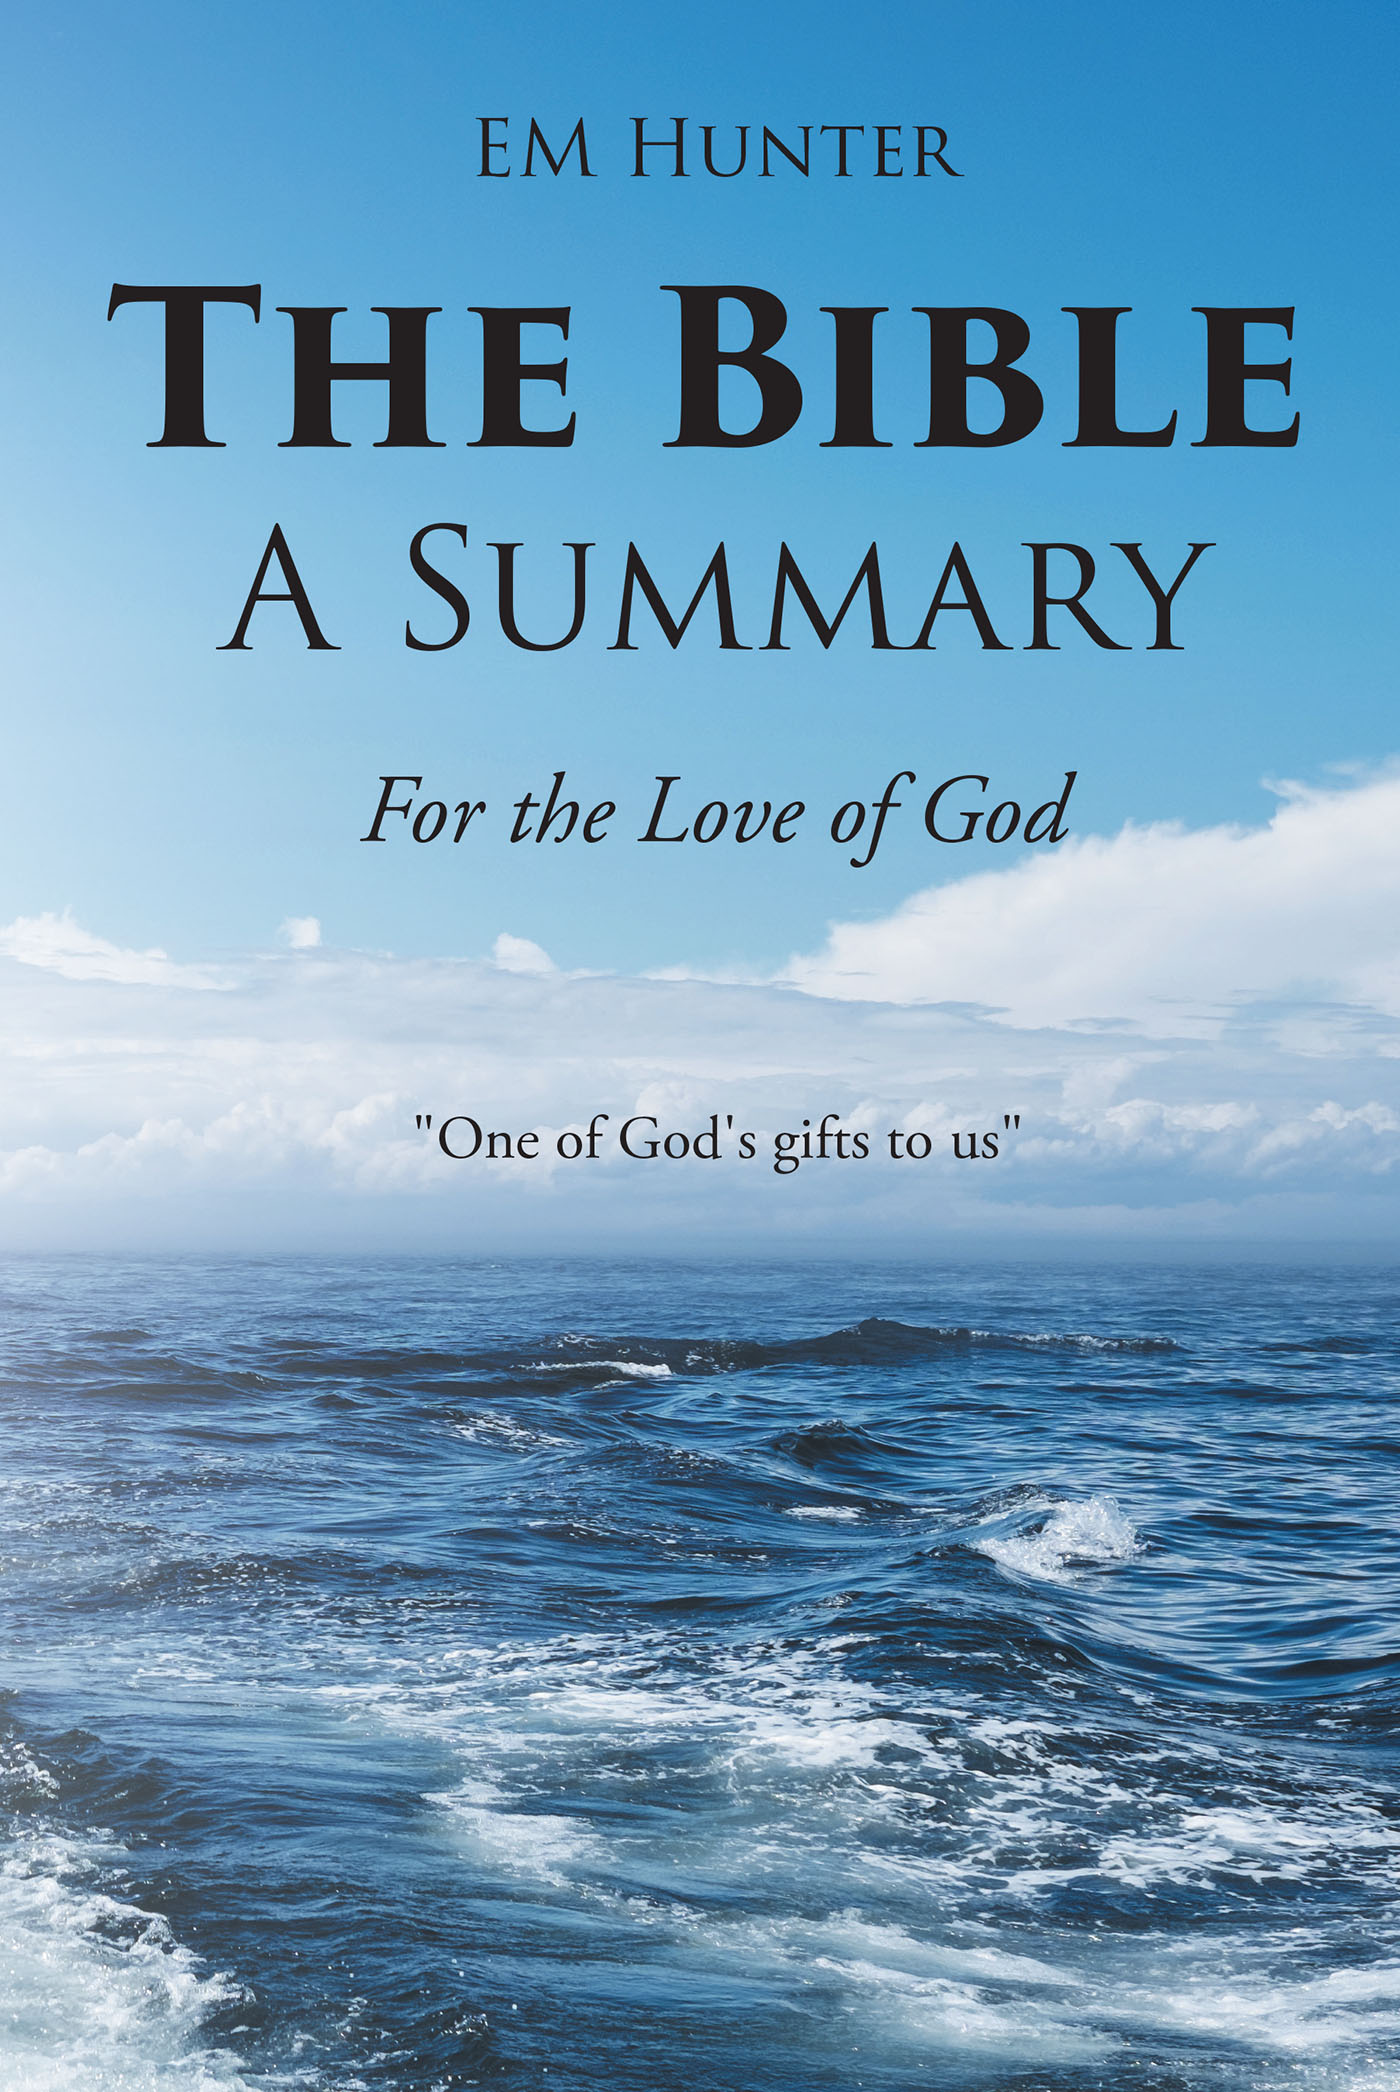 Author EM Hunter’s New Book, “The Bible, A Summary: For the Love of God” is an Invaluable Resource for Anyone Seeking a Cogent Synopsis of the Old Testament